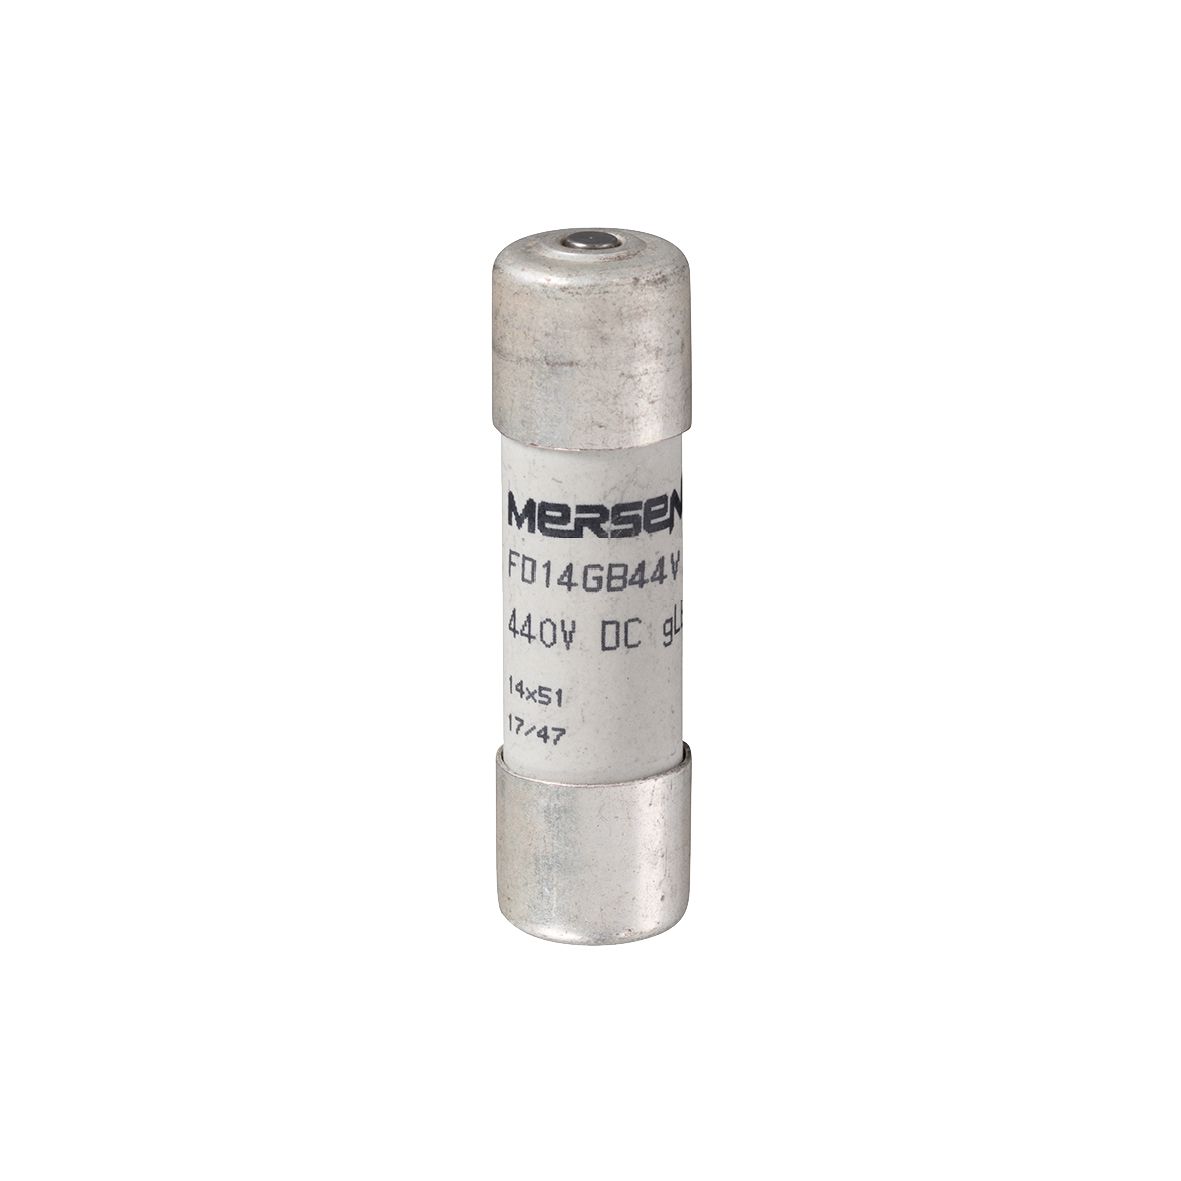 F075721 - Cylindrical fuse-link GRB 440VDC 14x51, 8A with striker